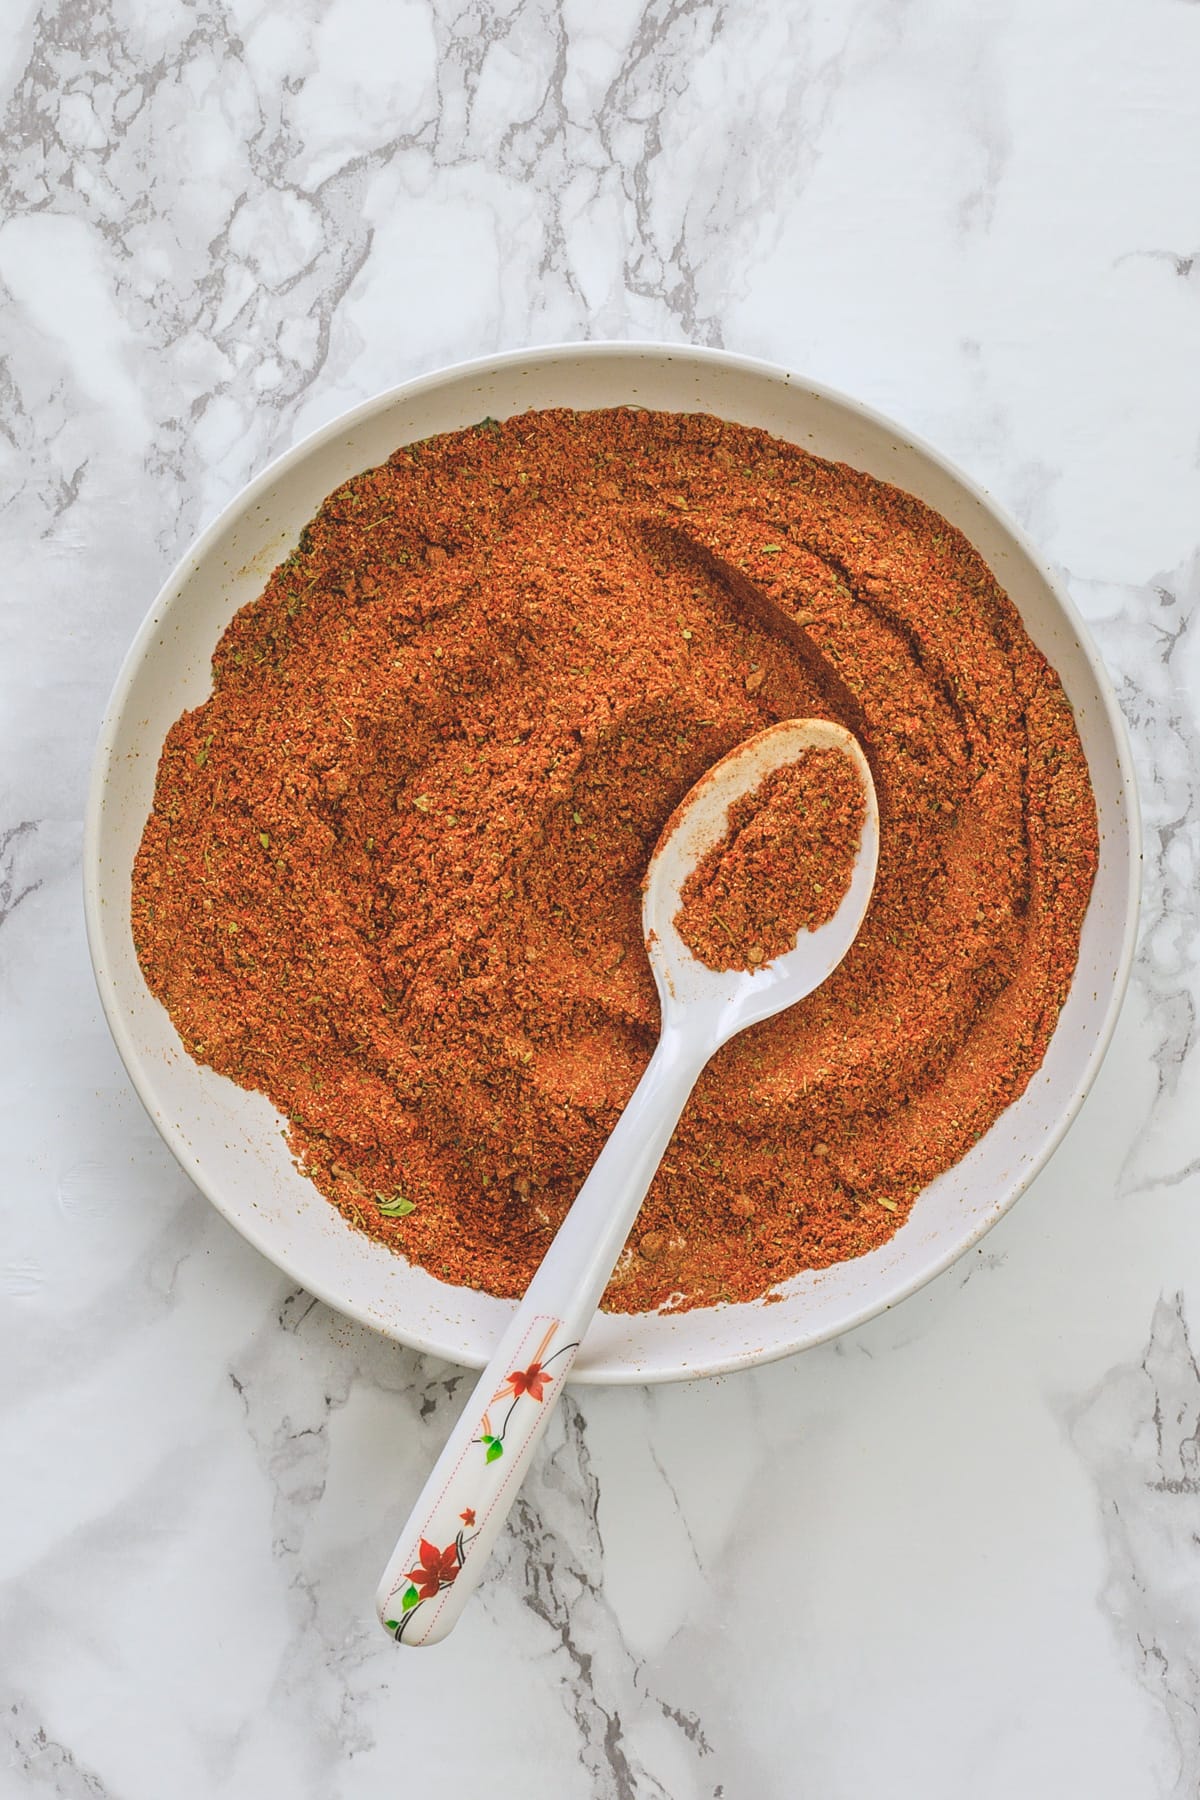 Tikka masala spice mix in a plate with spoon in it.